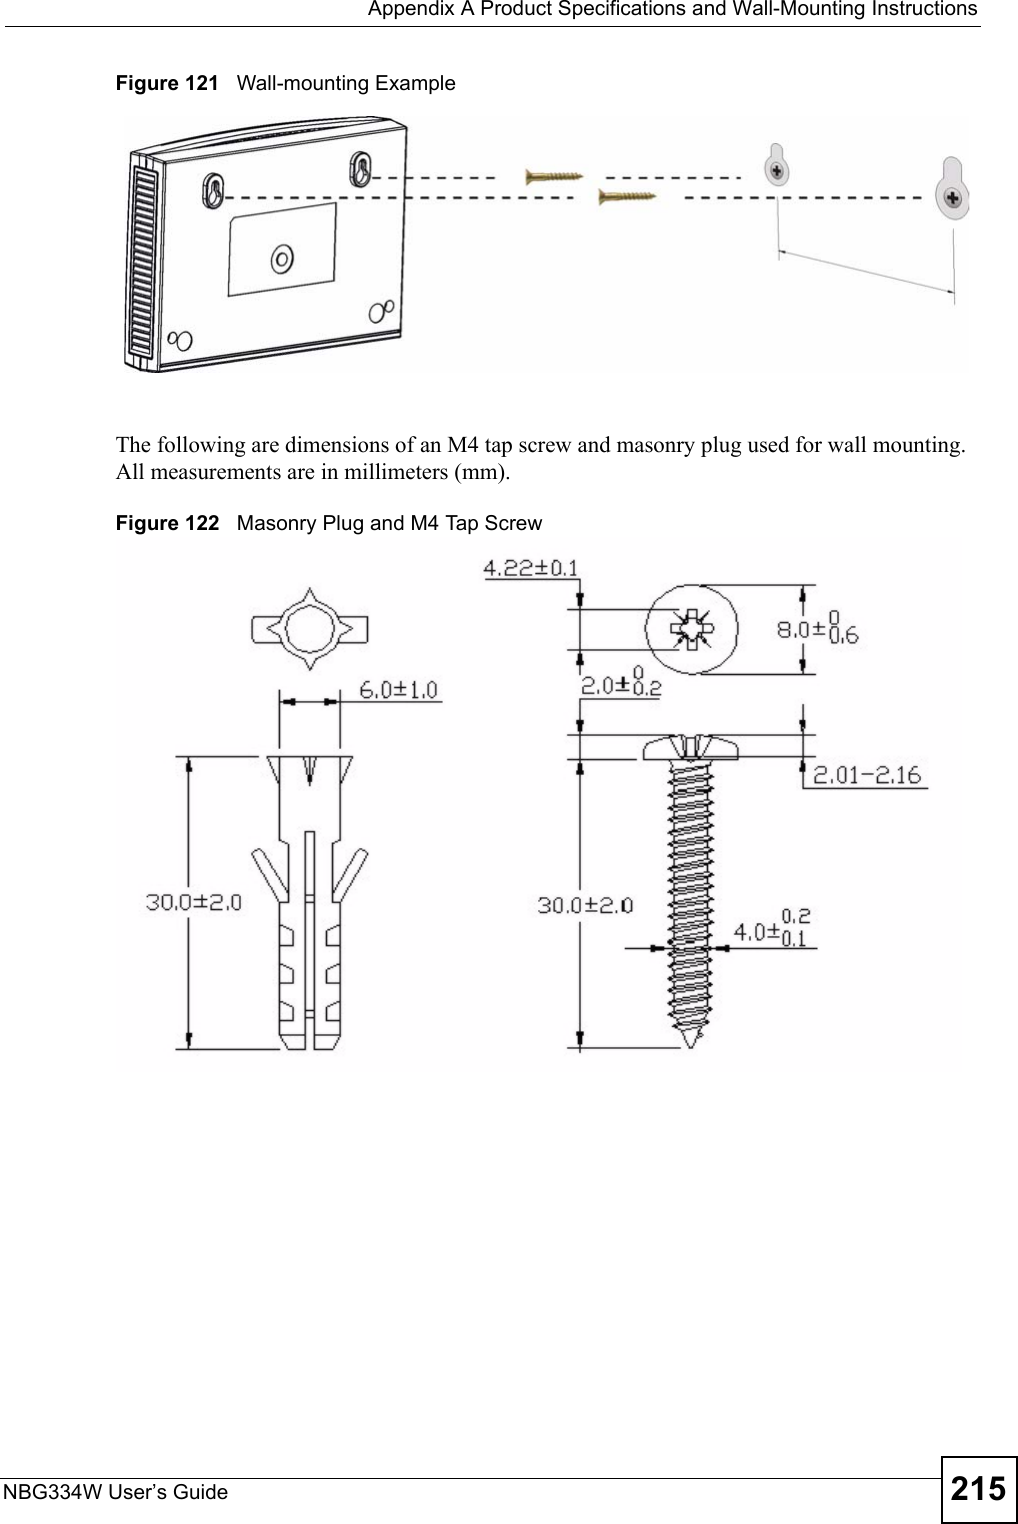  Appendix A Product Specifications and Wall-Mounting InstructionsNBG334W User’s Guide 215Figure 121   Wall-mounting ExampleThe following are dimensions of an M4 tap screw and masonry plug used for wall mounting. All measurements are in millimeters (mm). Figure 122   Masonry Plug and M4 Tap Screw